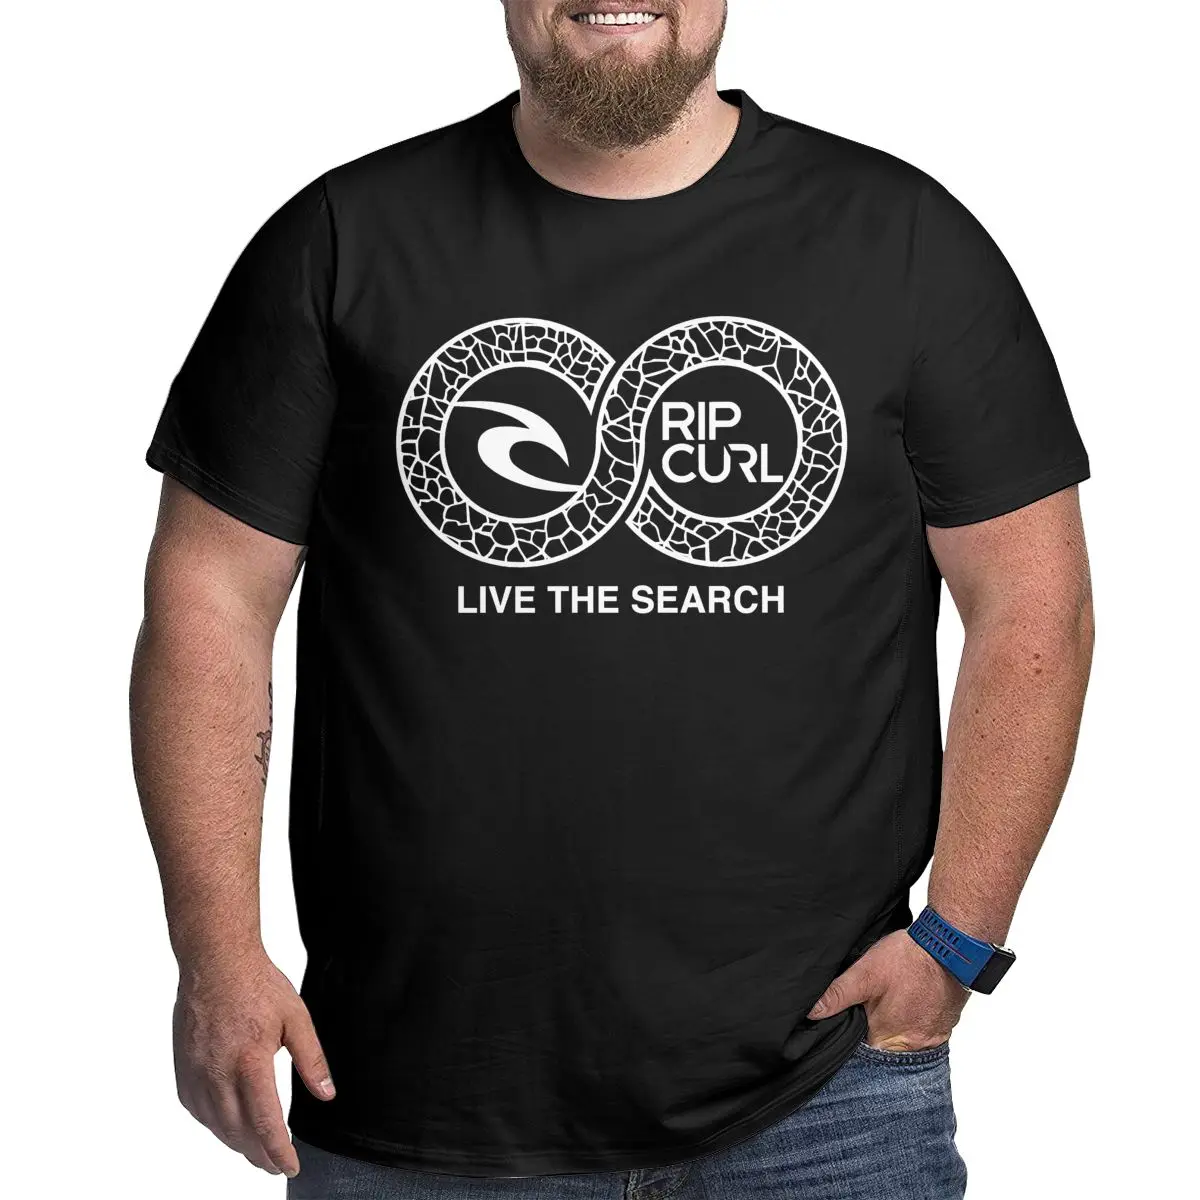 

Rip Two White Circles Surfing Curl 100% Cotton T Shirts for Big Tall Man Oversized Plus Size Top Tee Men's Loose Large Top